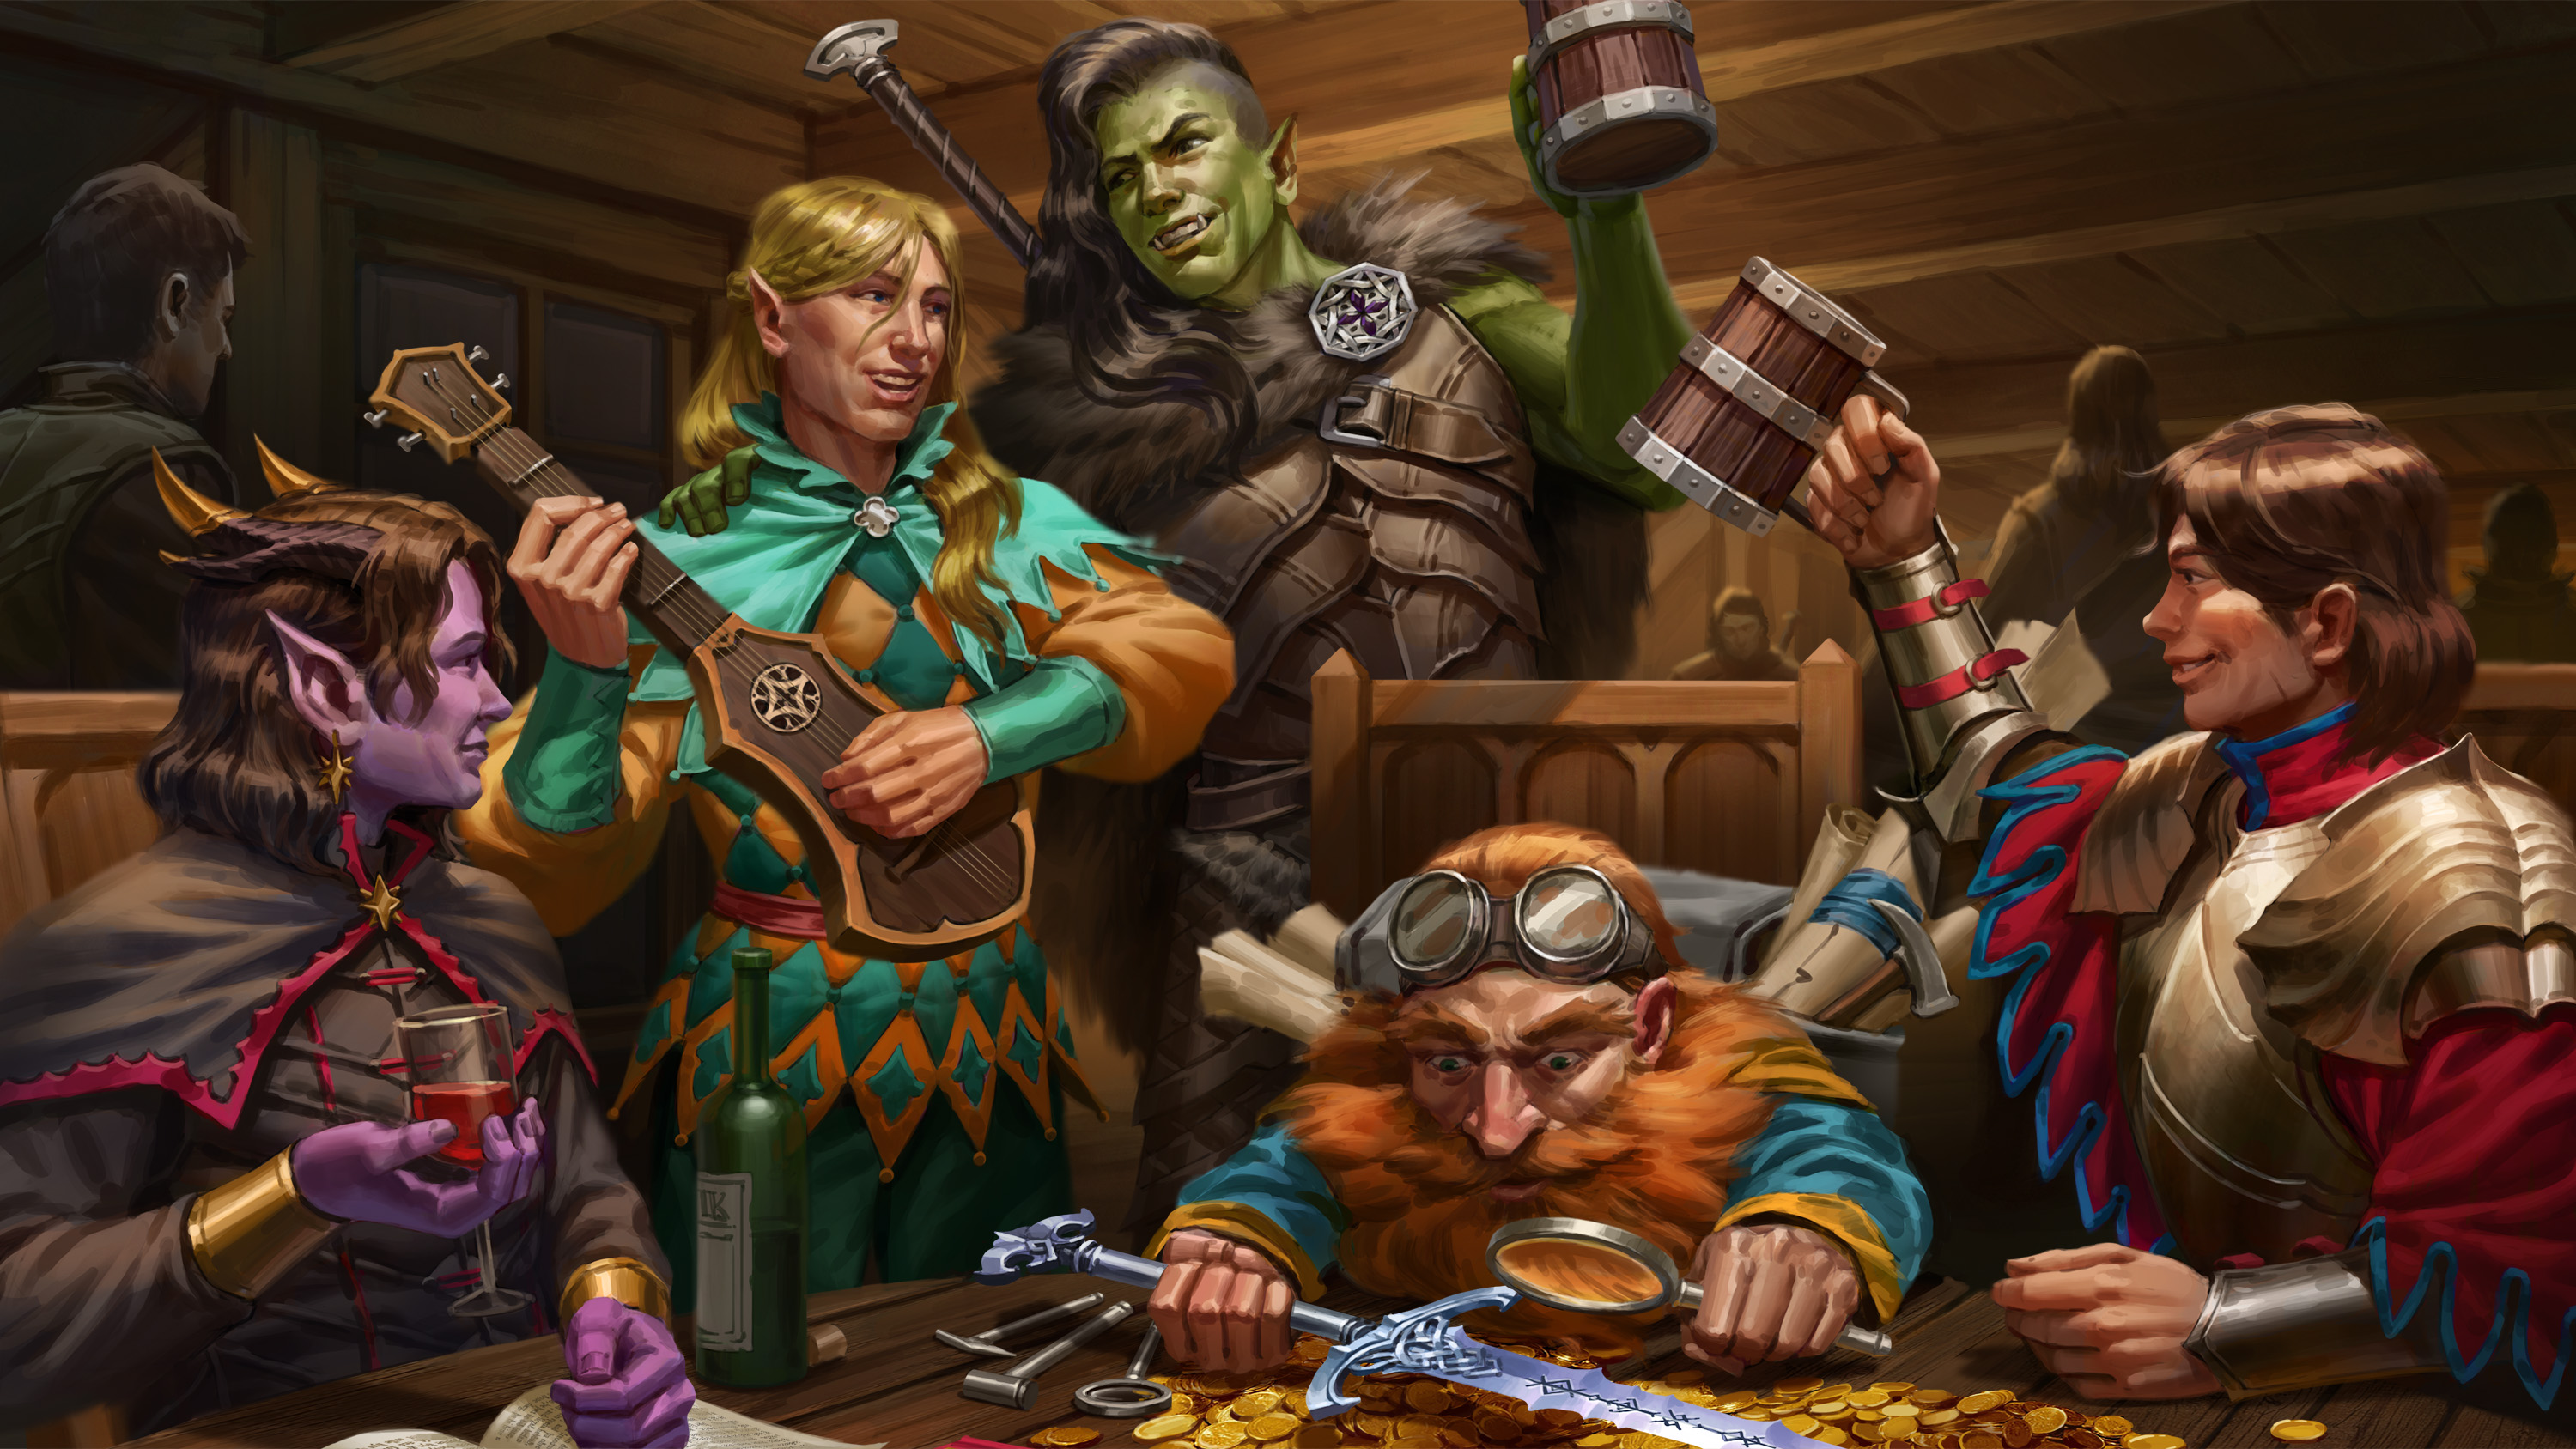 A party of adventurers celebrates at a tavern. As a bard plays on, several drink and carouse. A dwarf admires a sword with a magnifying glass in the foreground.